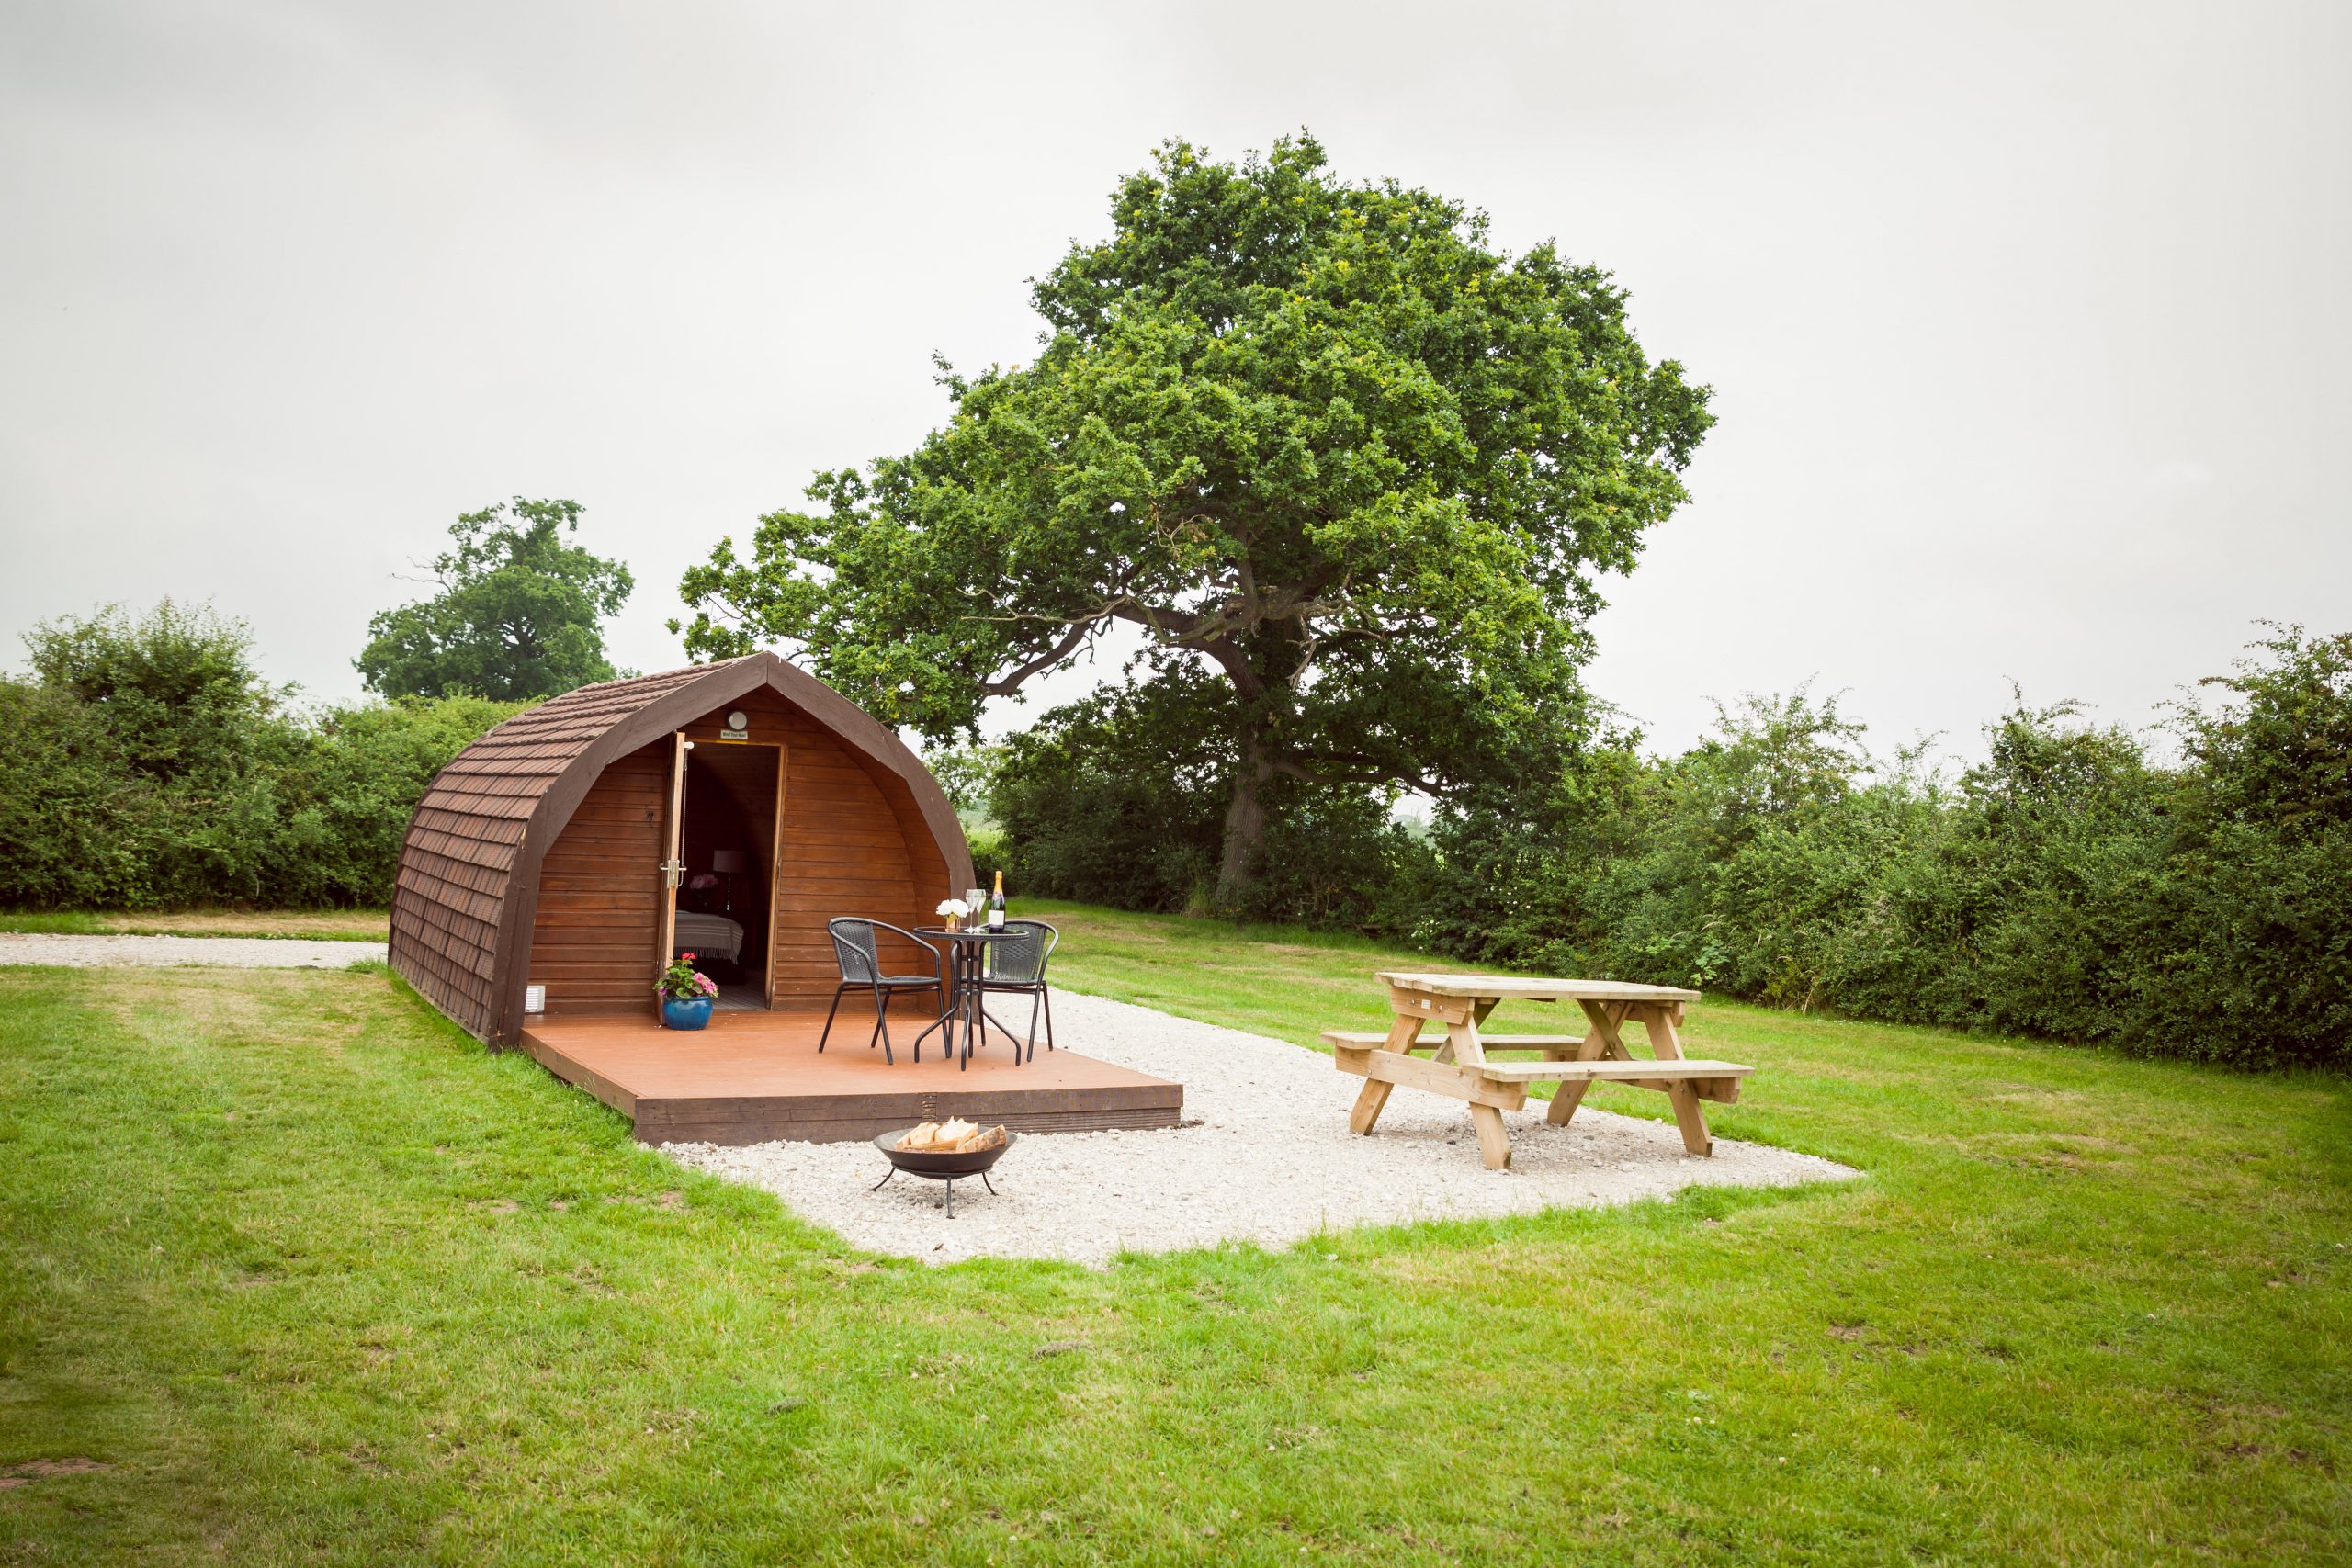 Pitch and Canvas | Glamping and Camping in Cheshire | Wooden pod